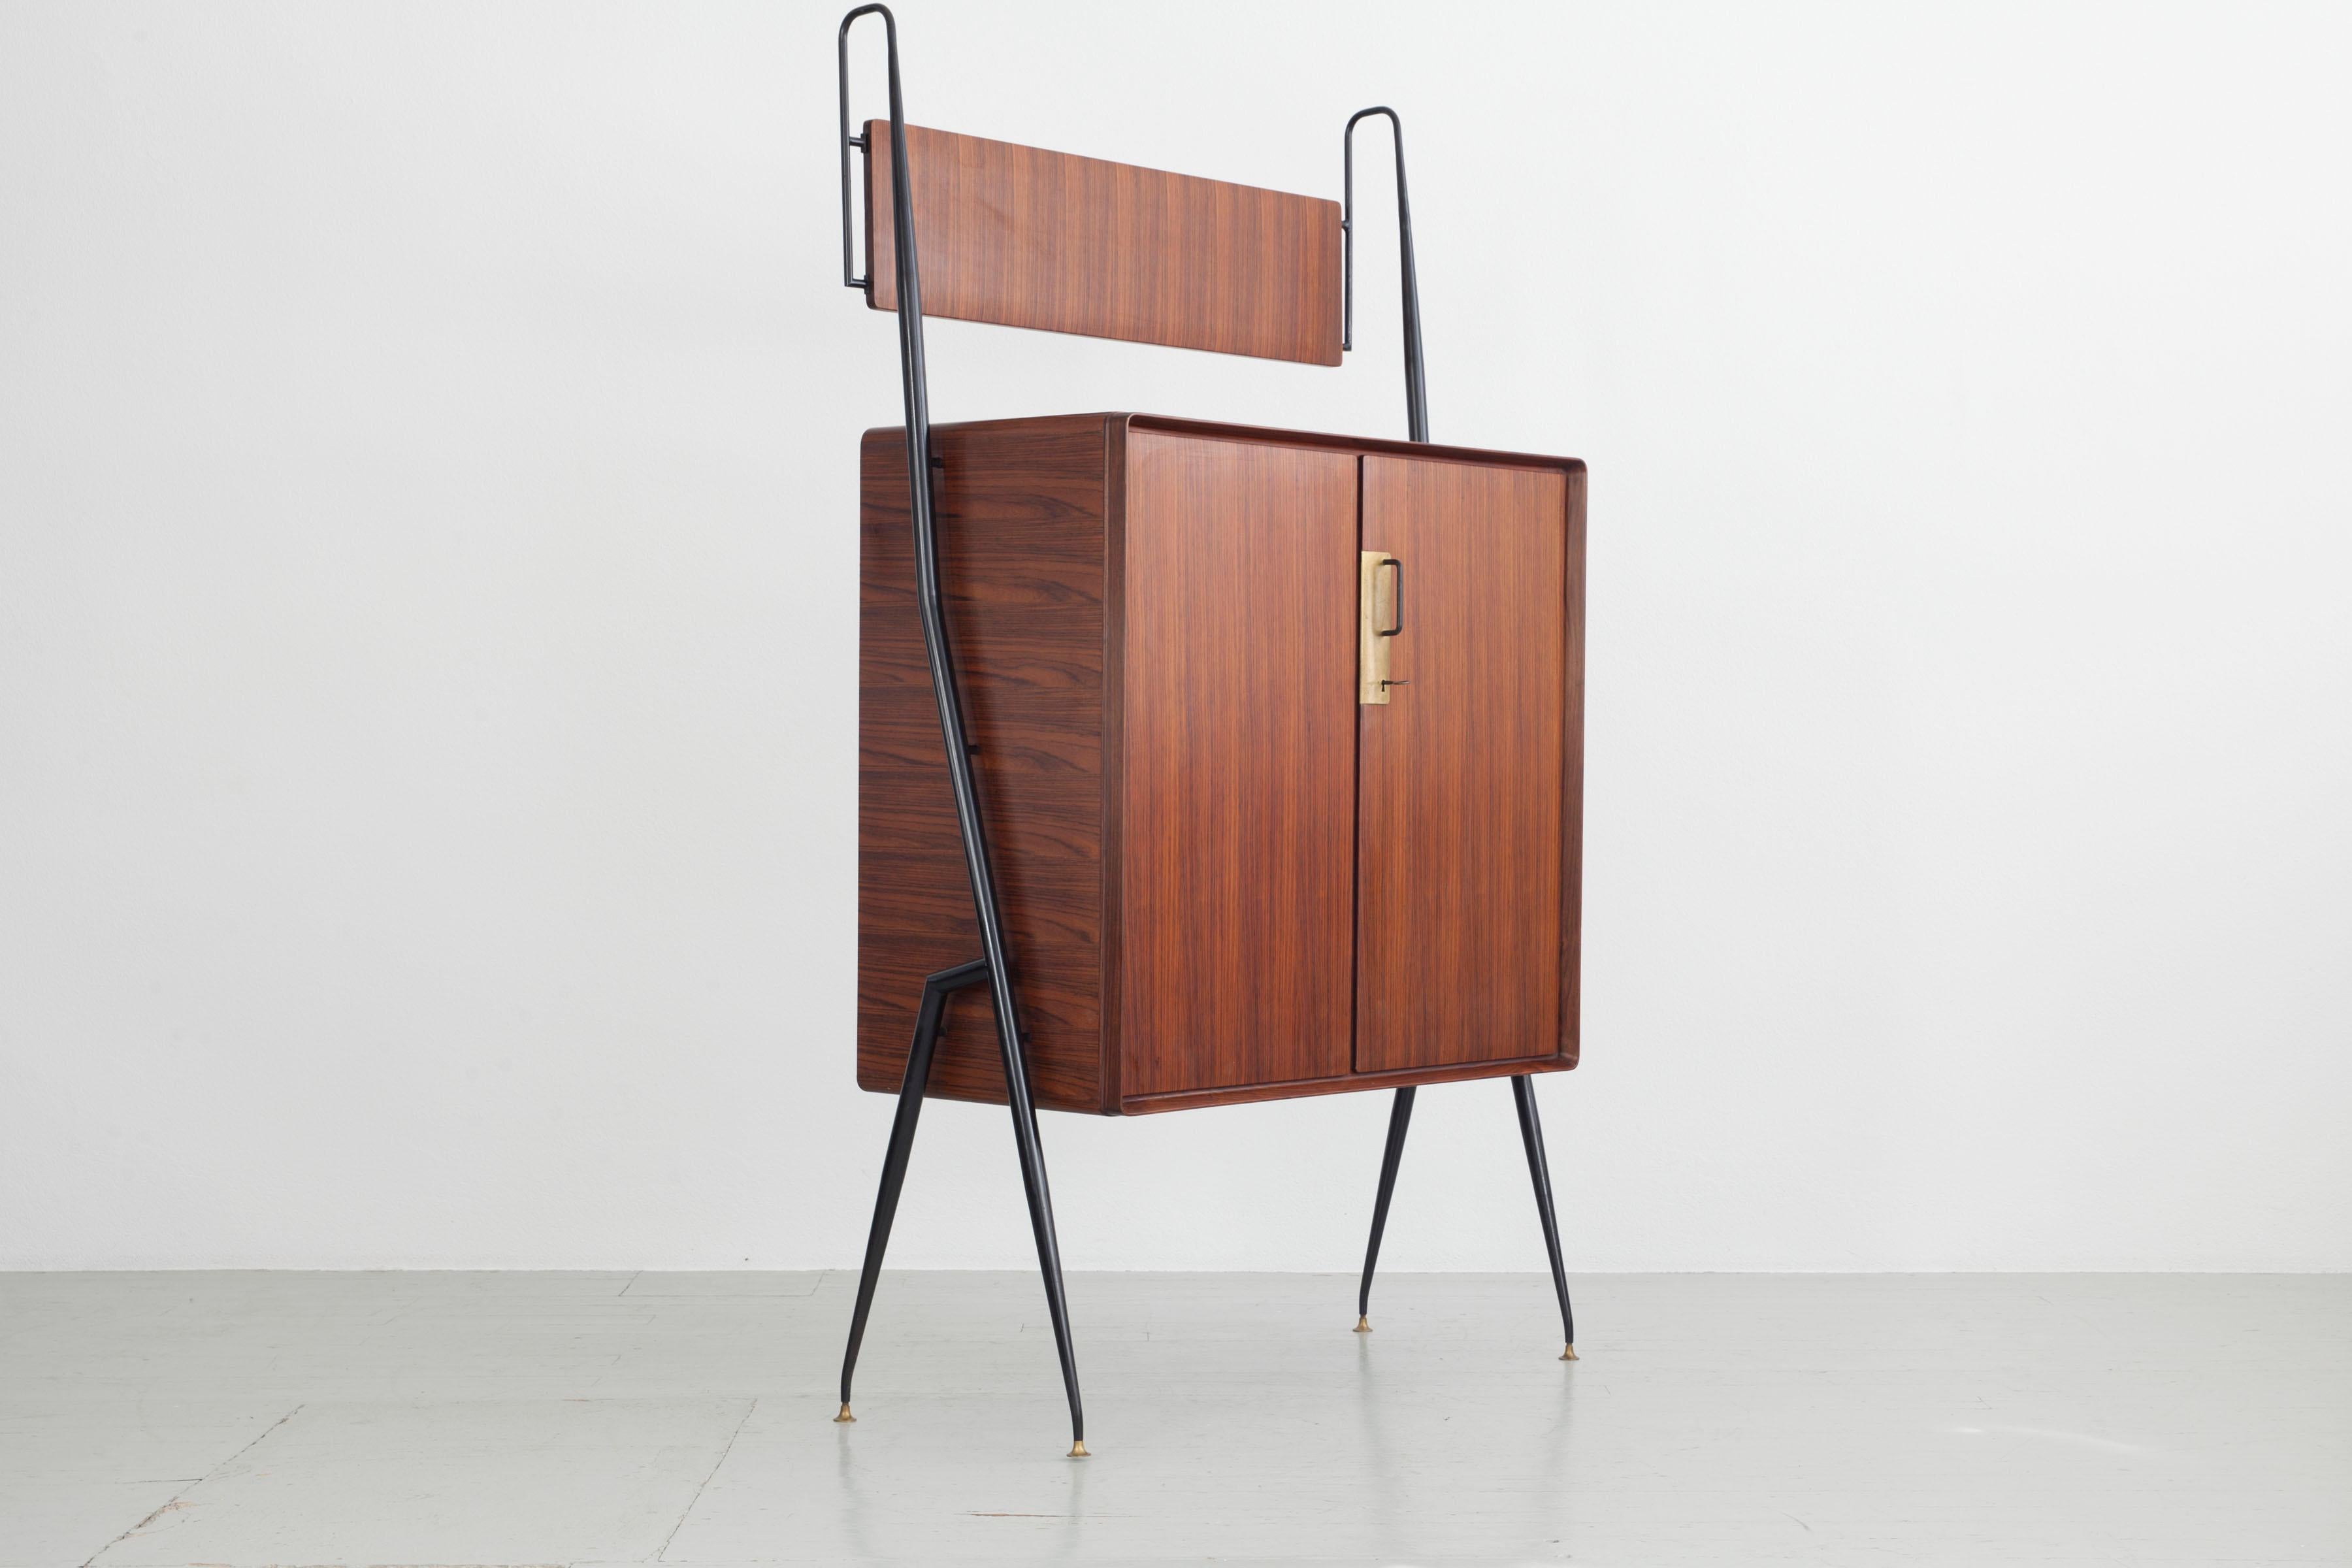 Storage cabinet made of wood, black lacquered metal legs and brass details.
Design: Silvio Cavatorta, Italy 1950s.